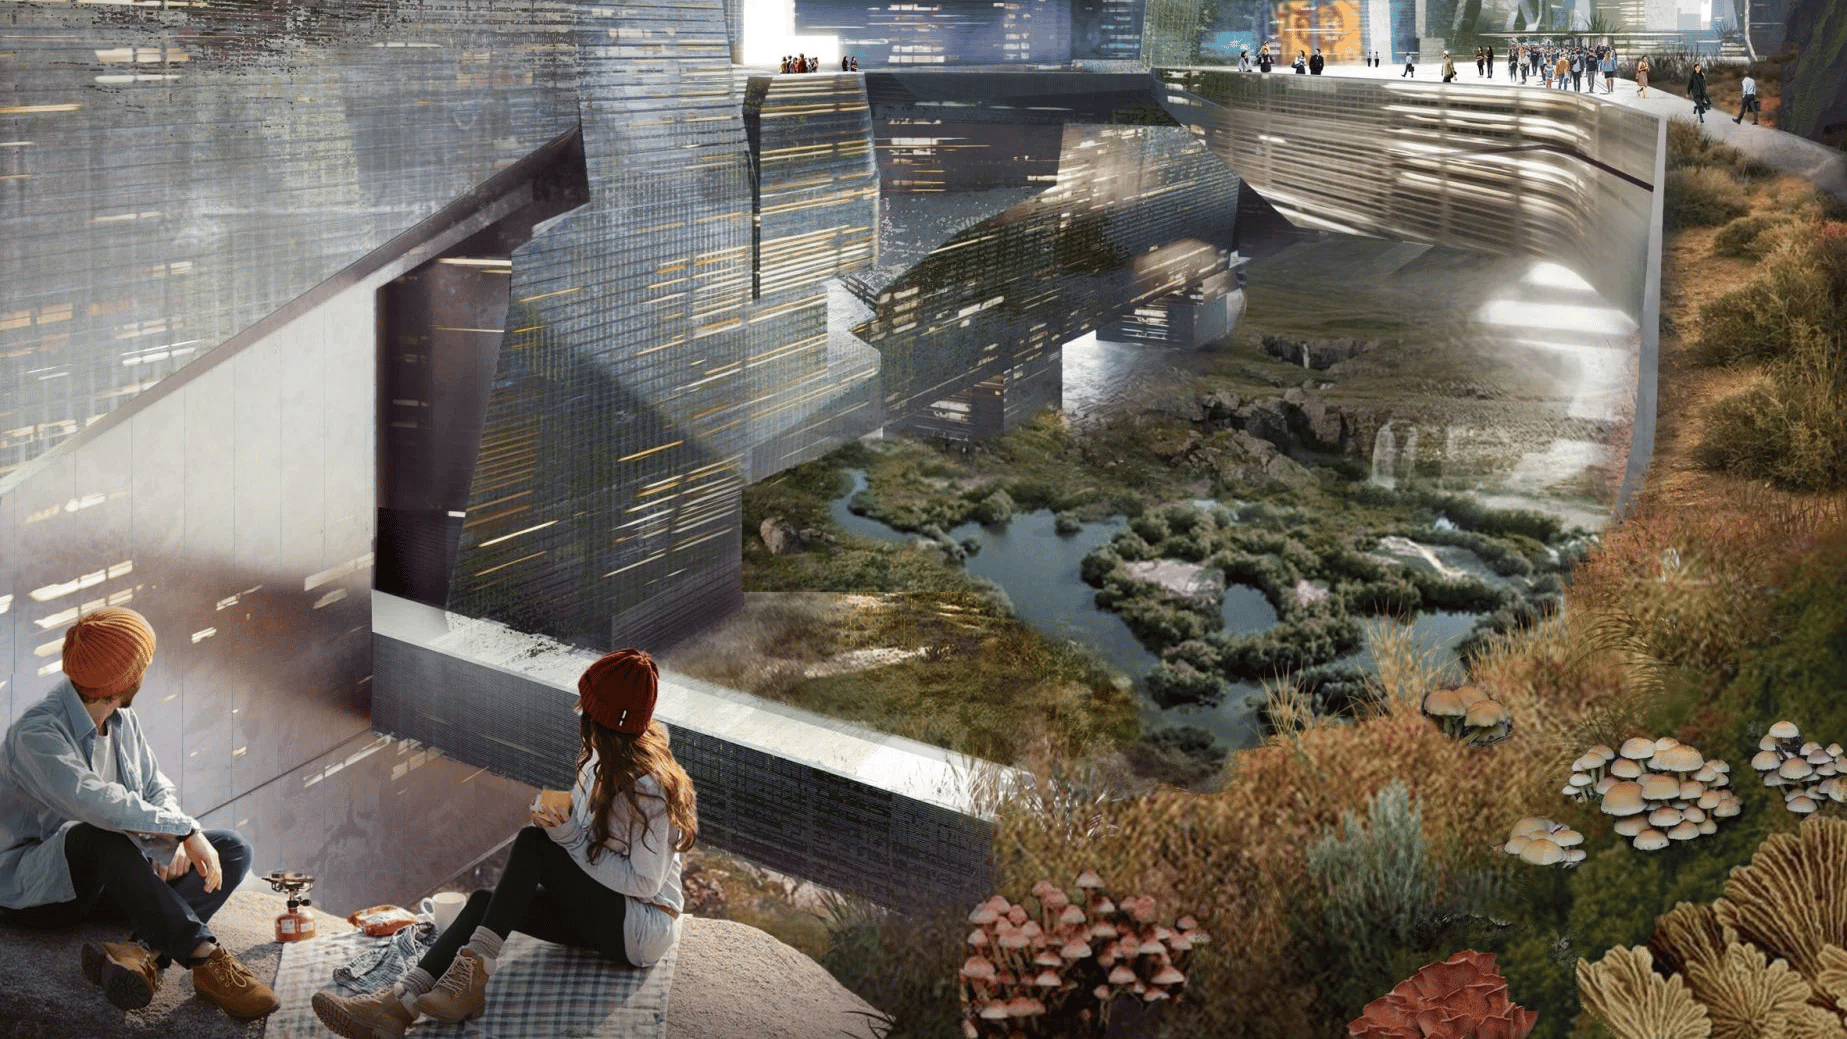 British architectural studio has joined the project of creating a city building Mirror Line